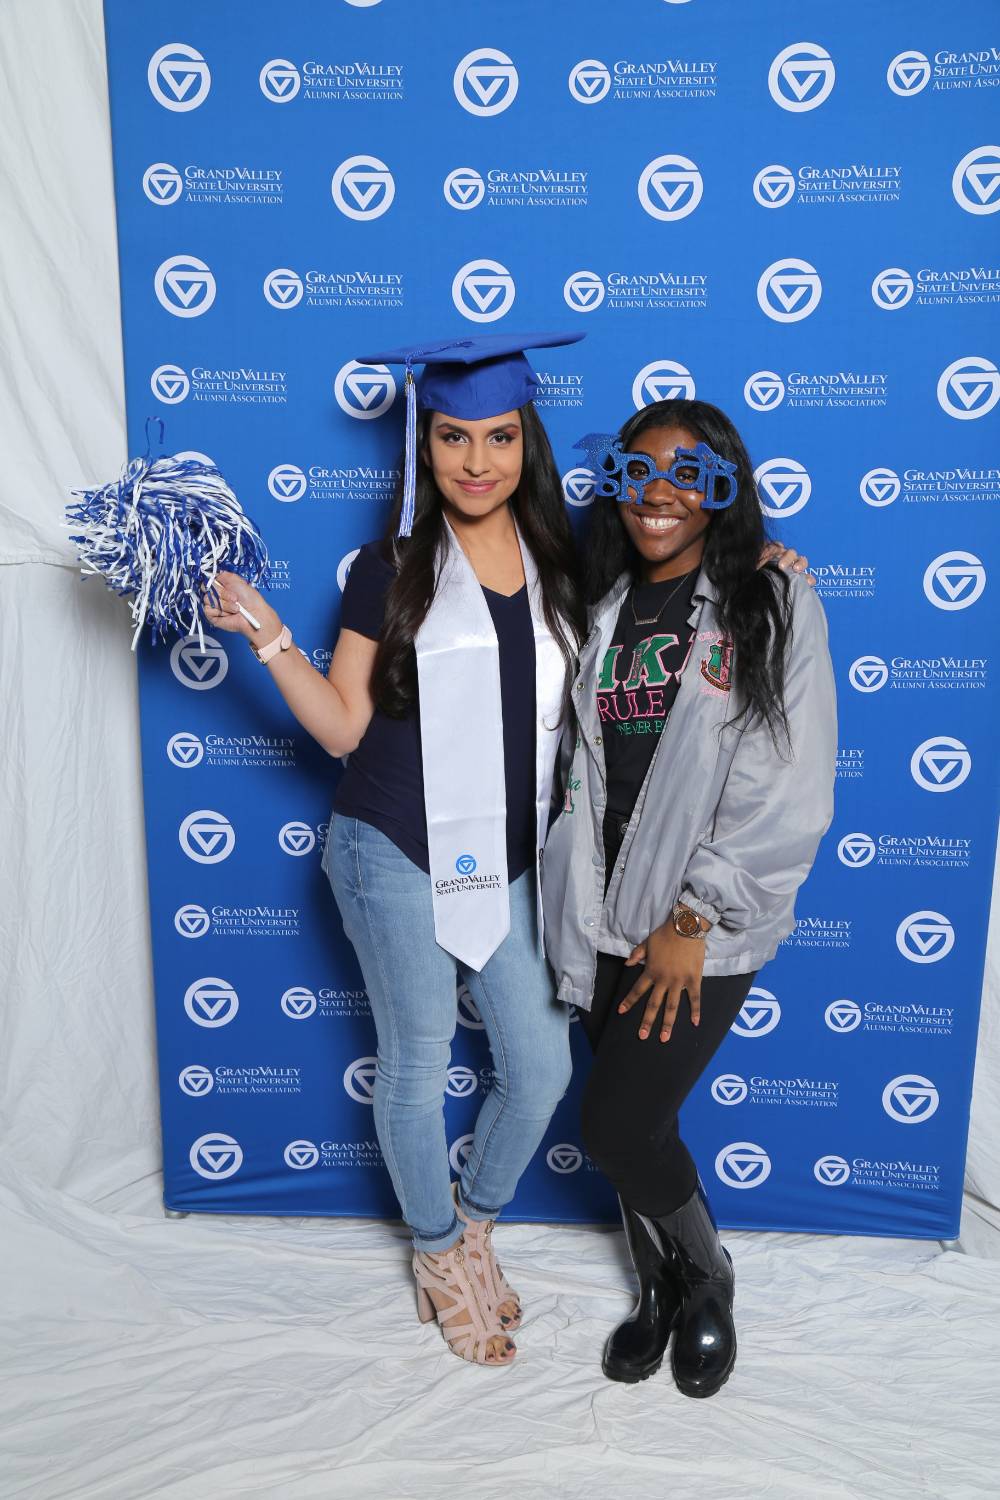 Two friends pose with props at Gradfest